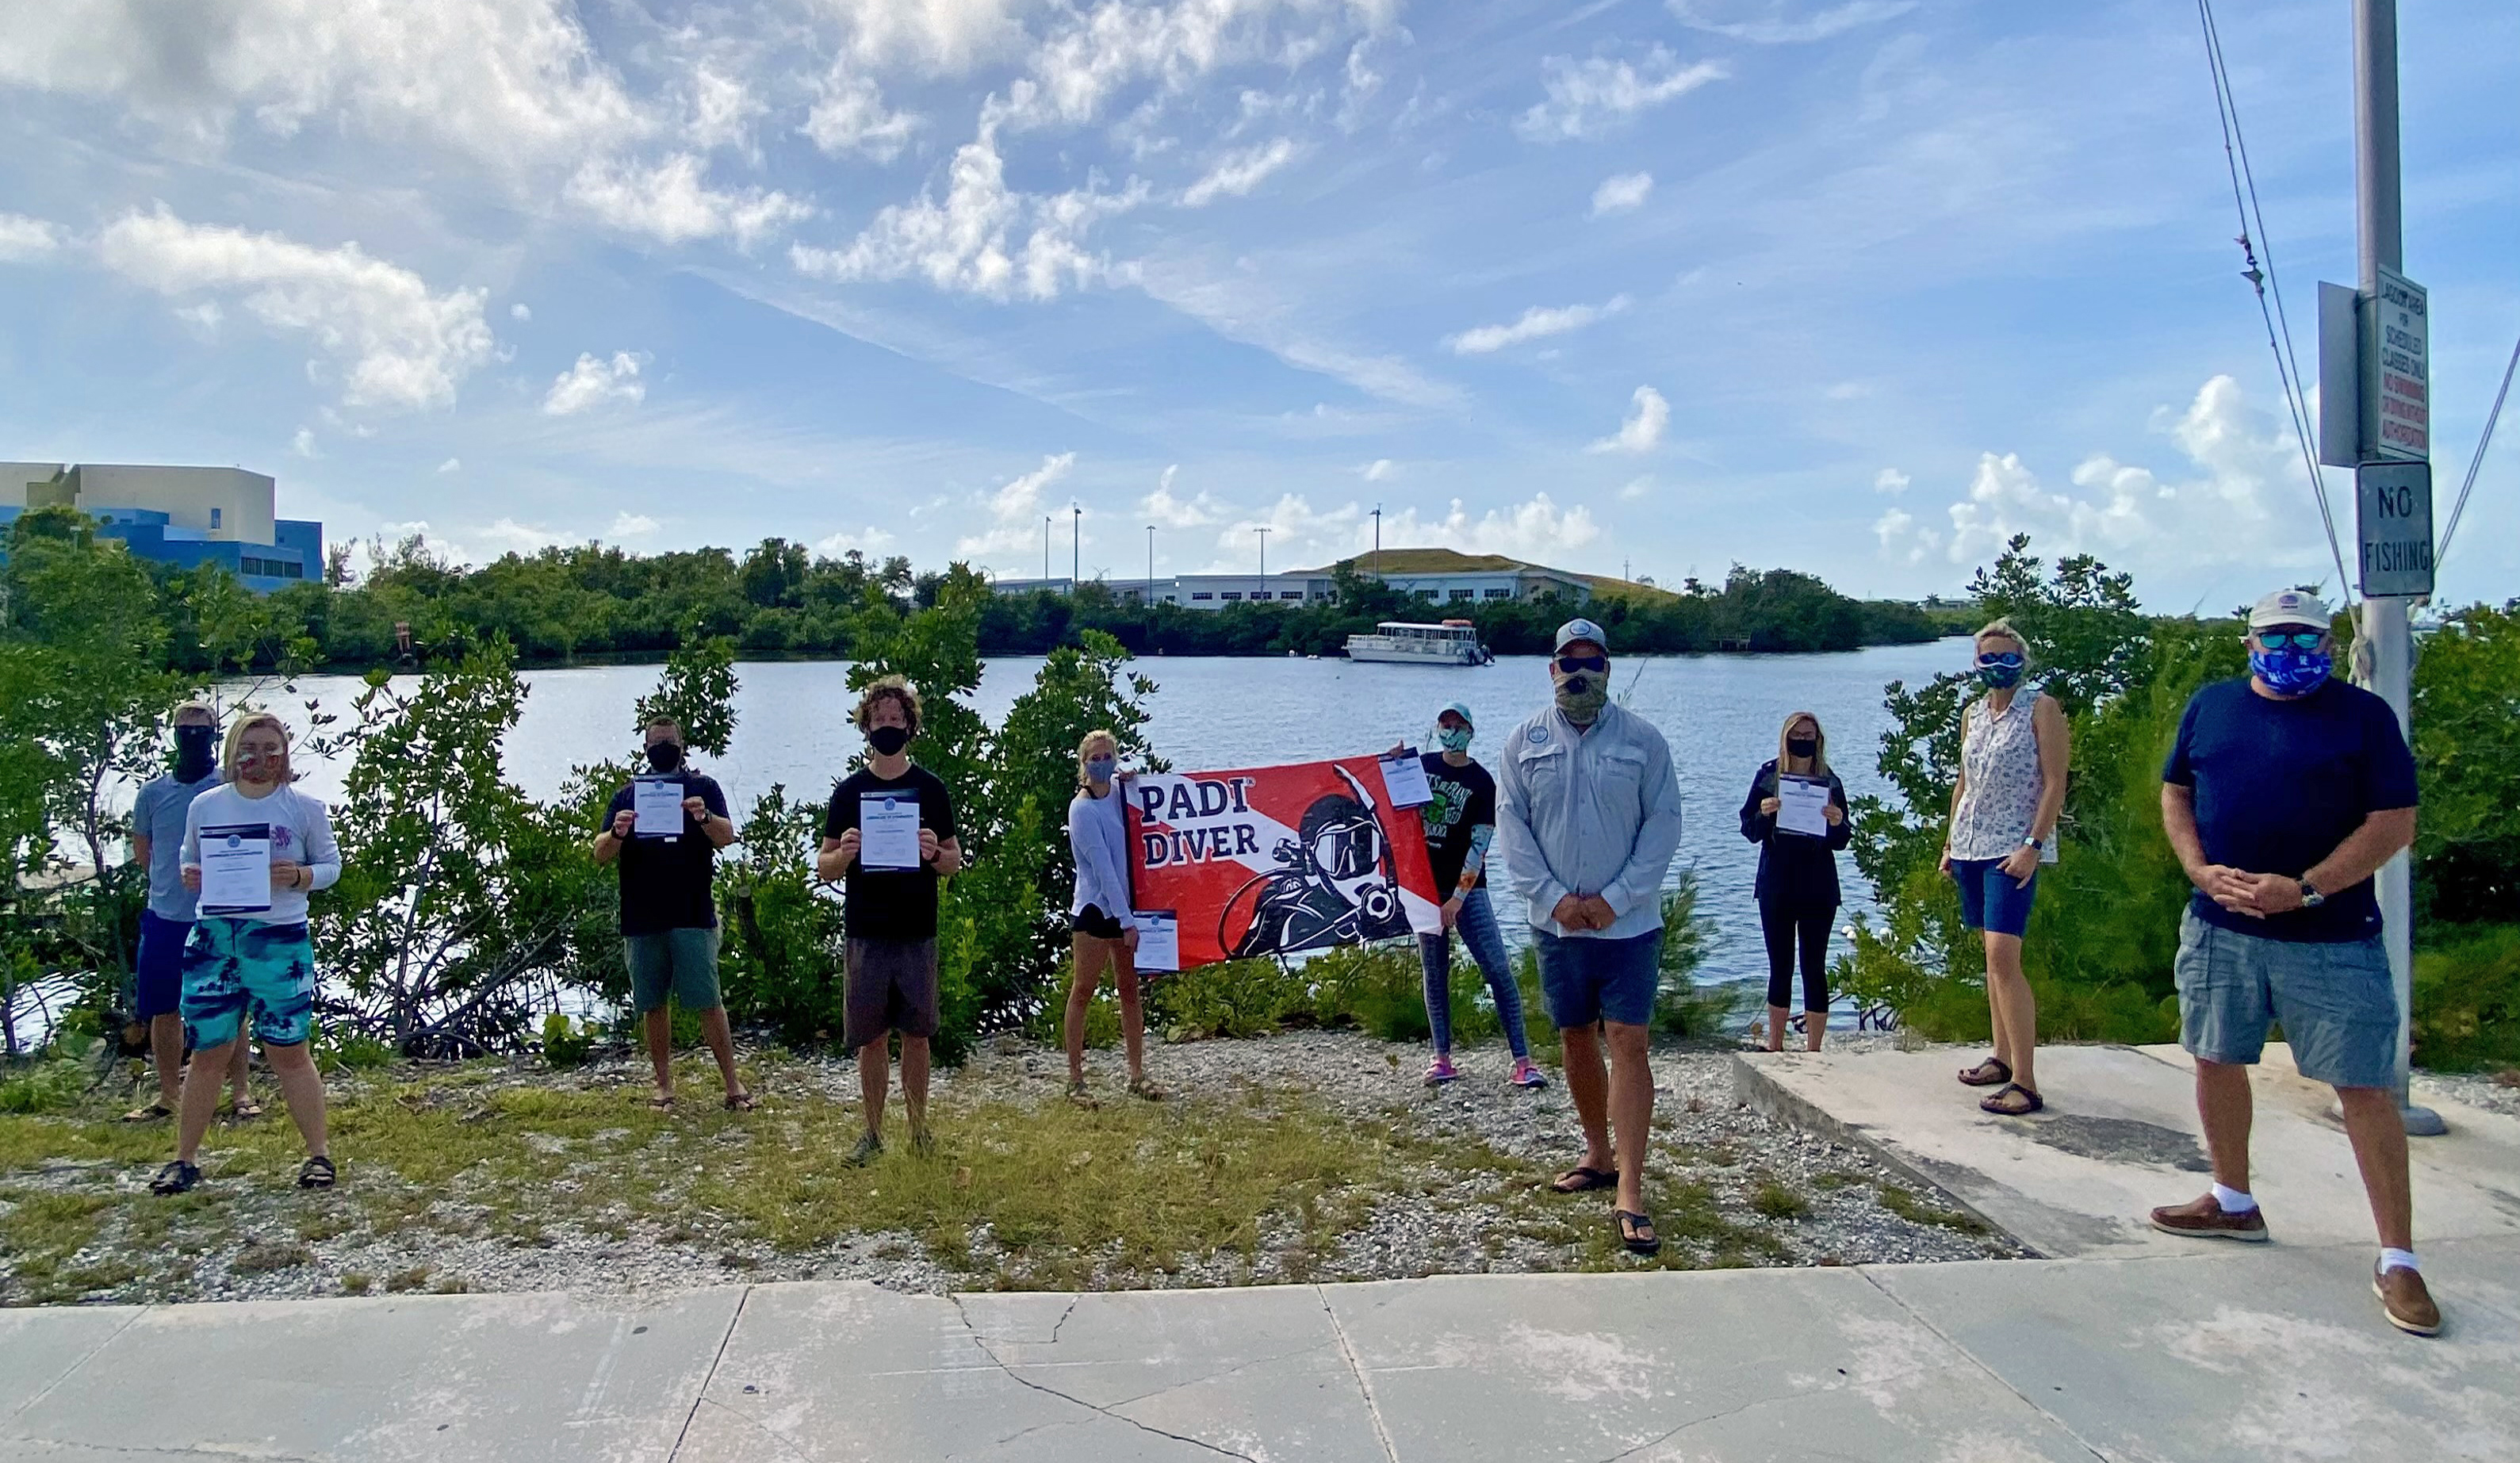 Students at @TheCollegeoftheFloridaKeys recently completed a certificate course to become @PADI certified diving instructors!